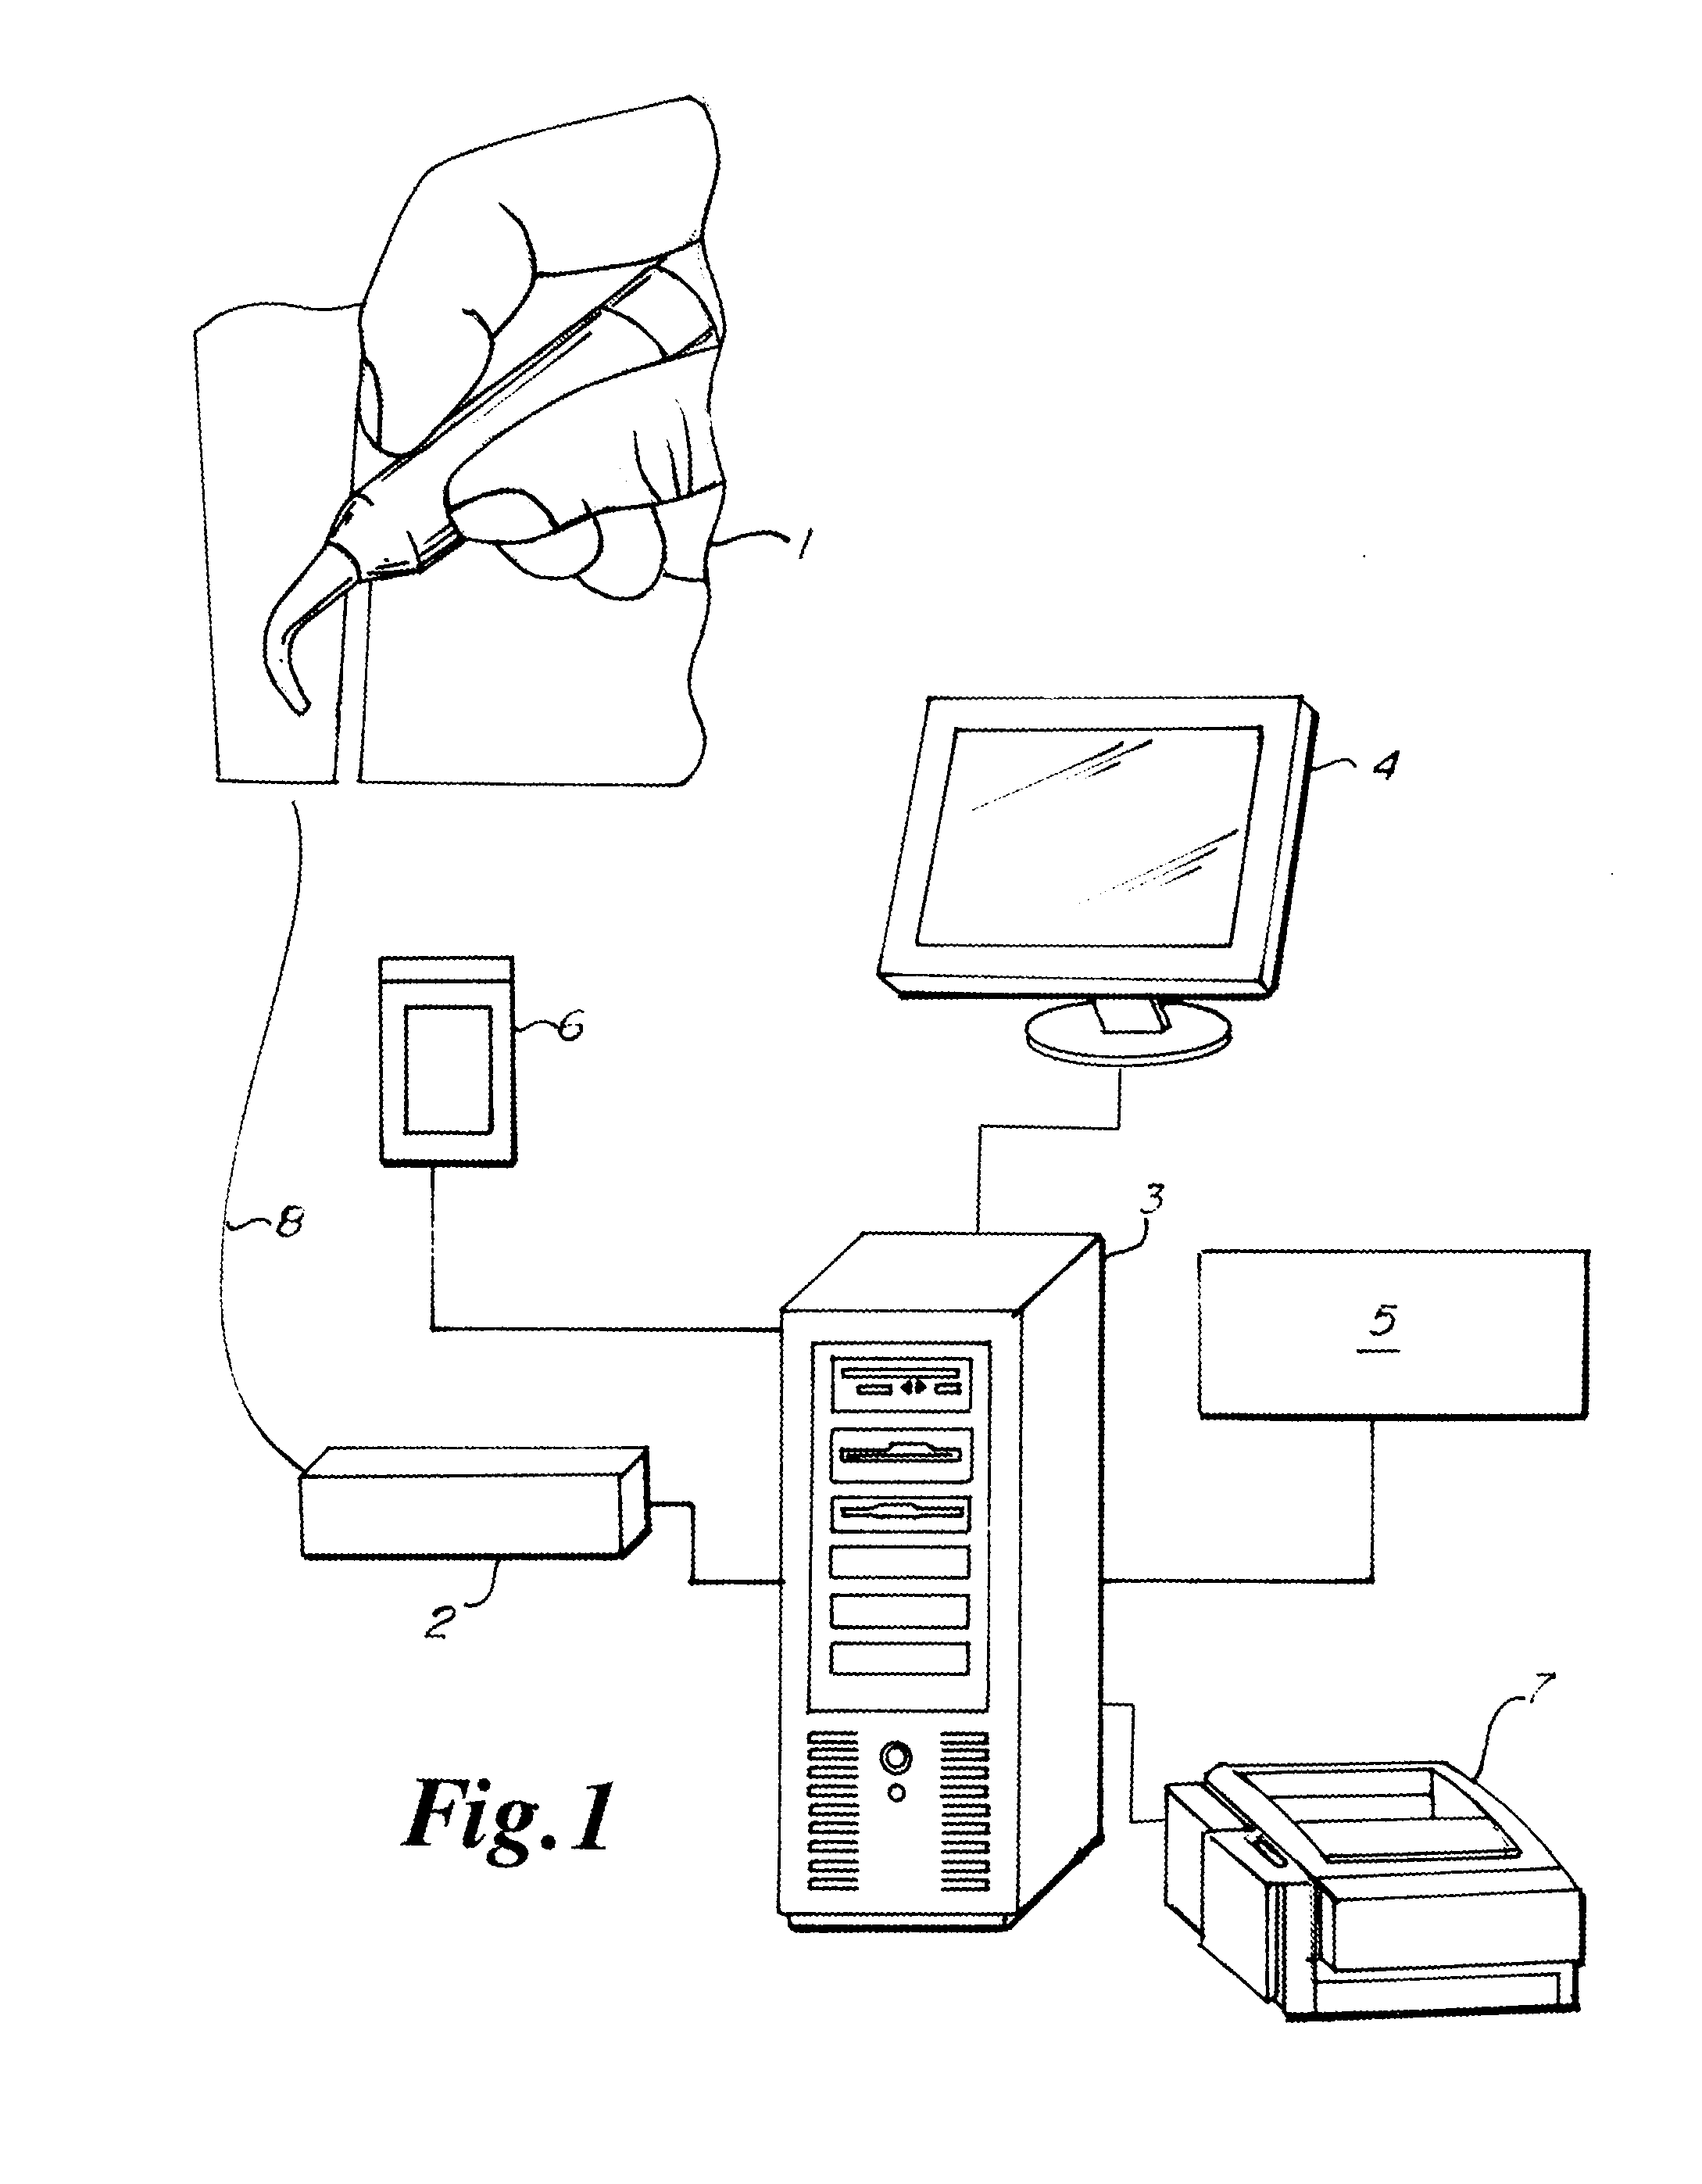 Computer aided canal instrumentation system and a unique endodontic instrument design